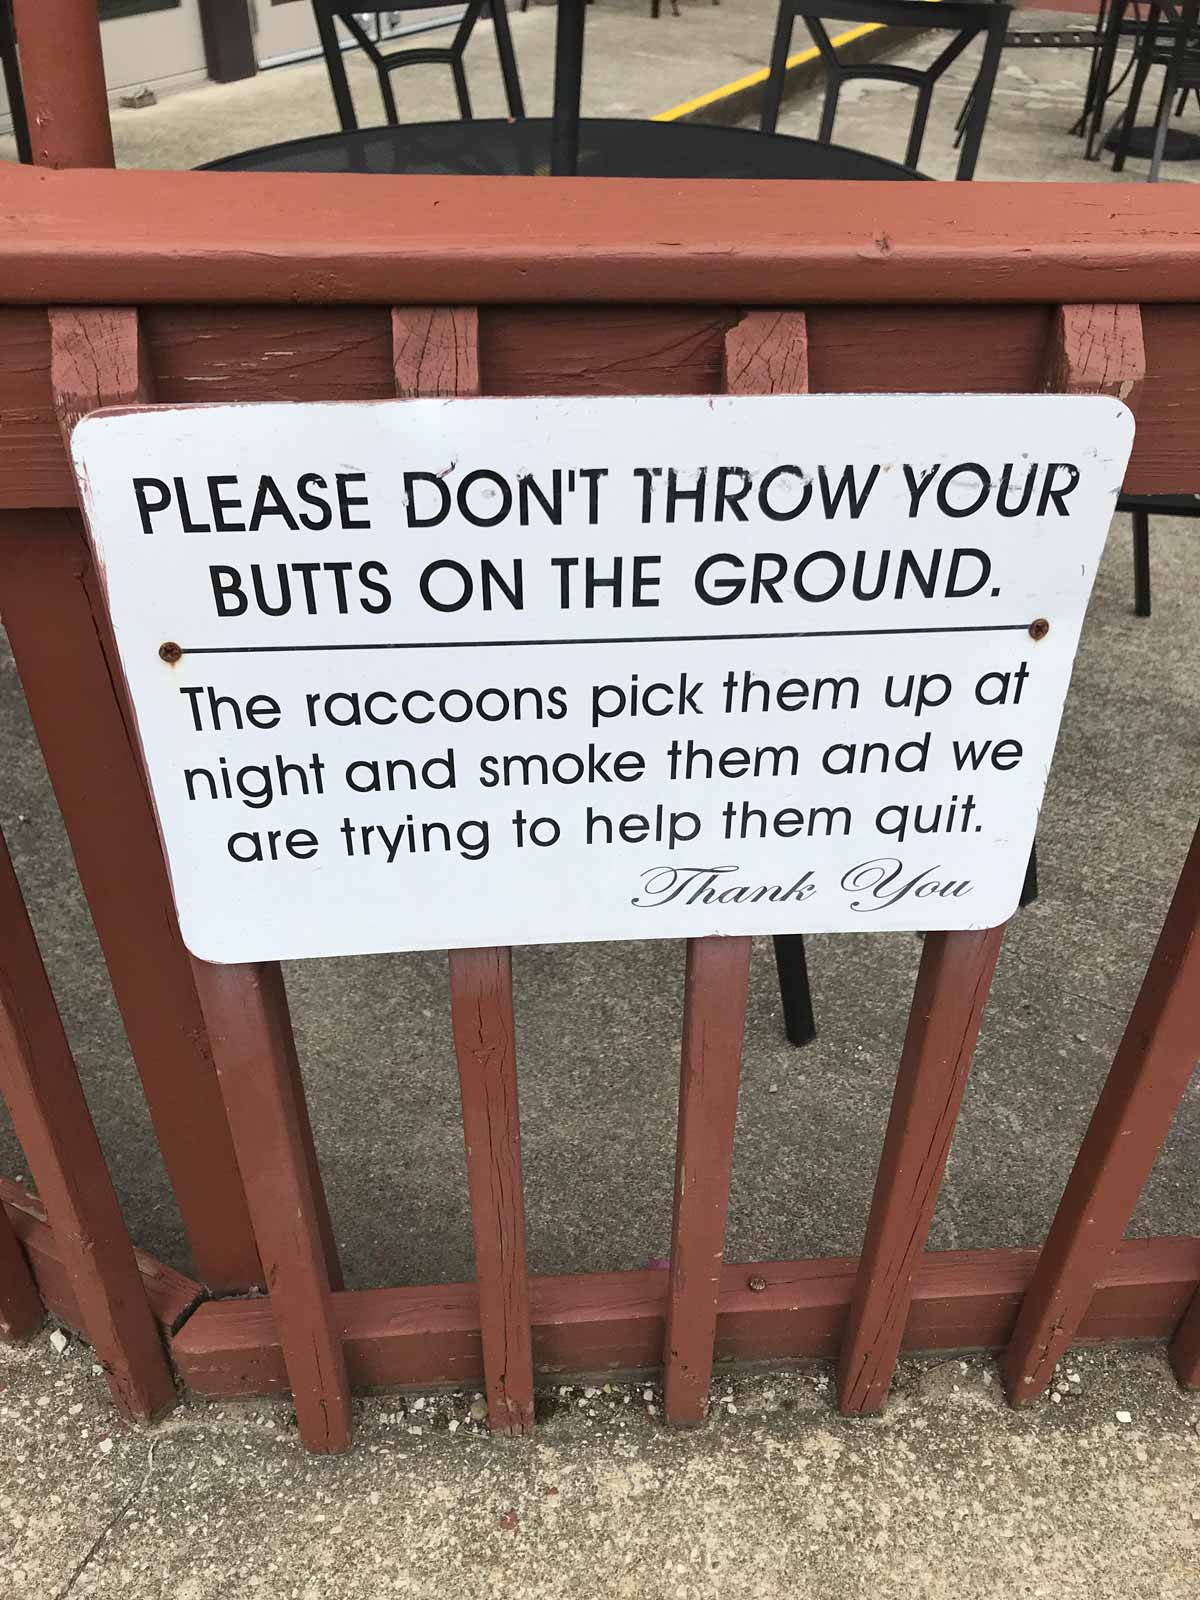 Funny anti-littering sign that says 'please don't throw your butts on the ground. The raccoons pick them up at night and smoke them and we are trying to help them quit. Thank you'